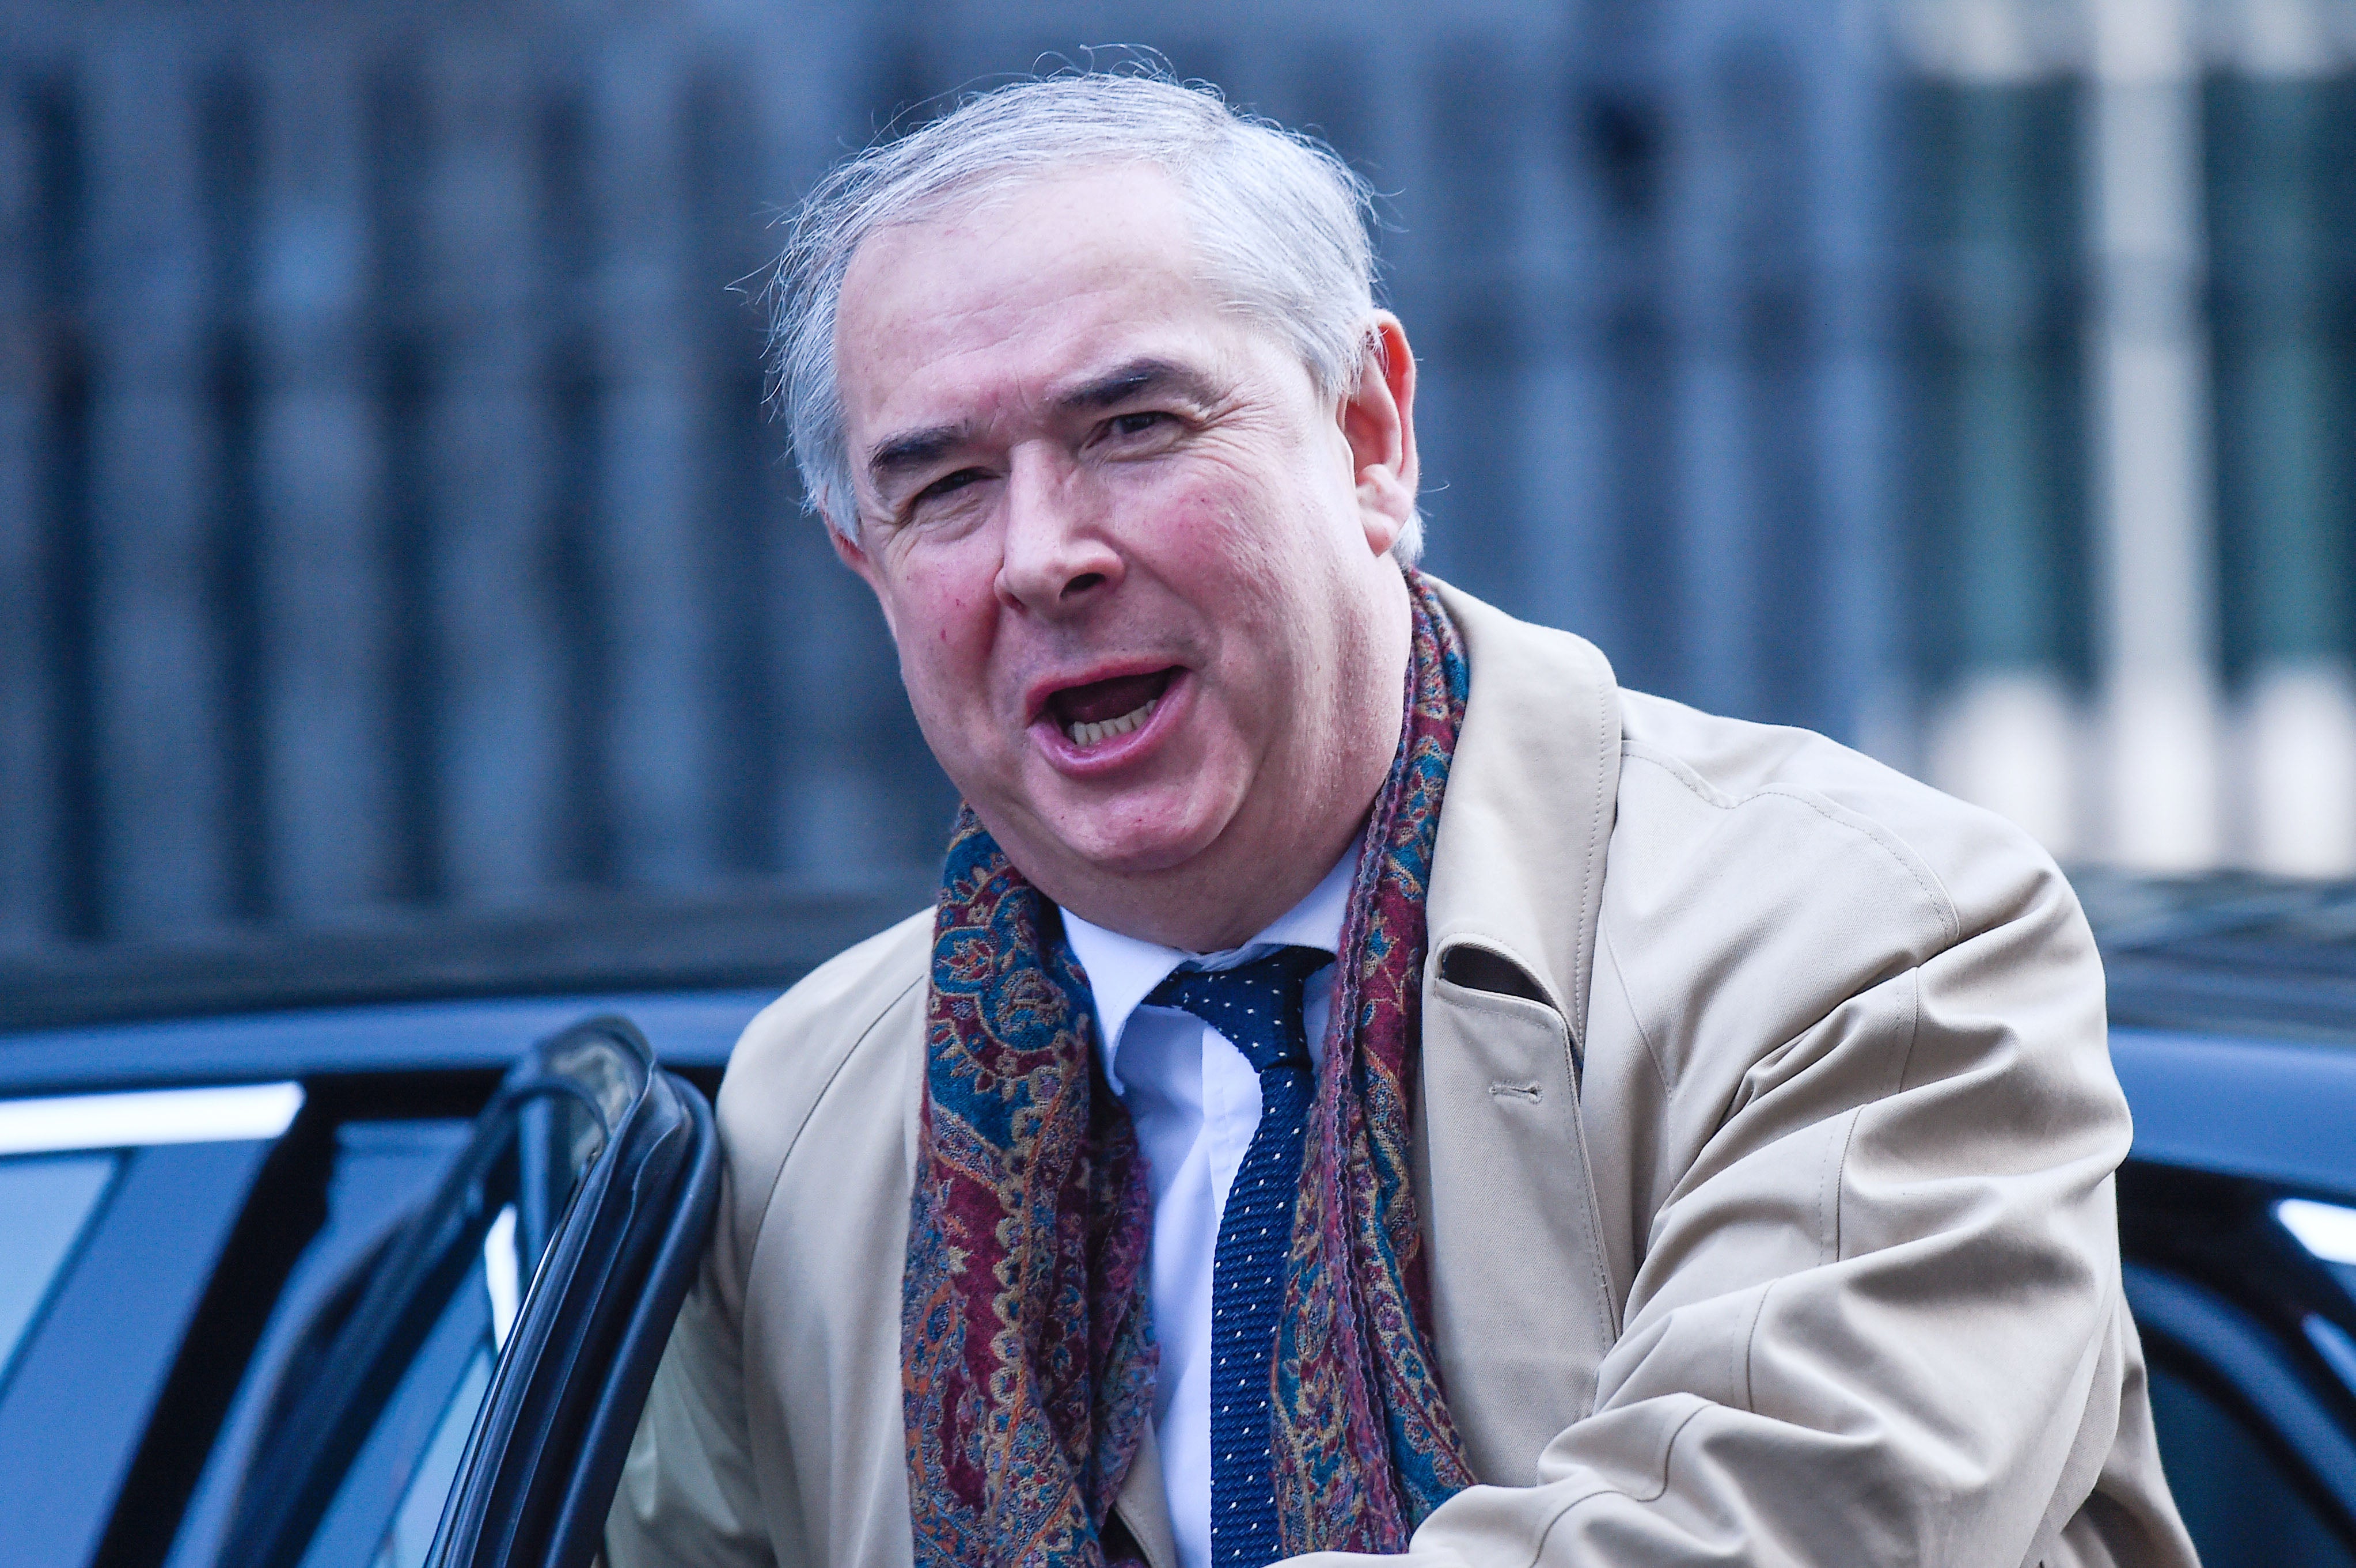 The prime minister declined to criticise or take action against Geoffrey Cox